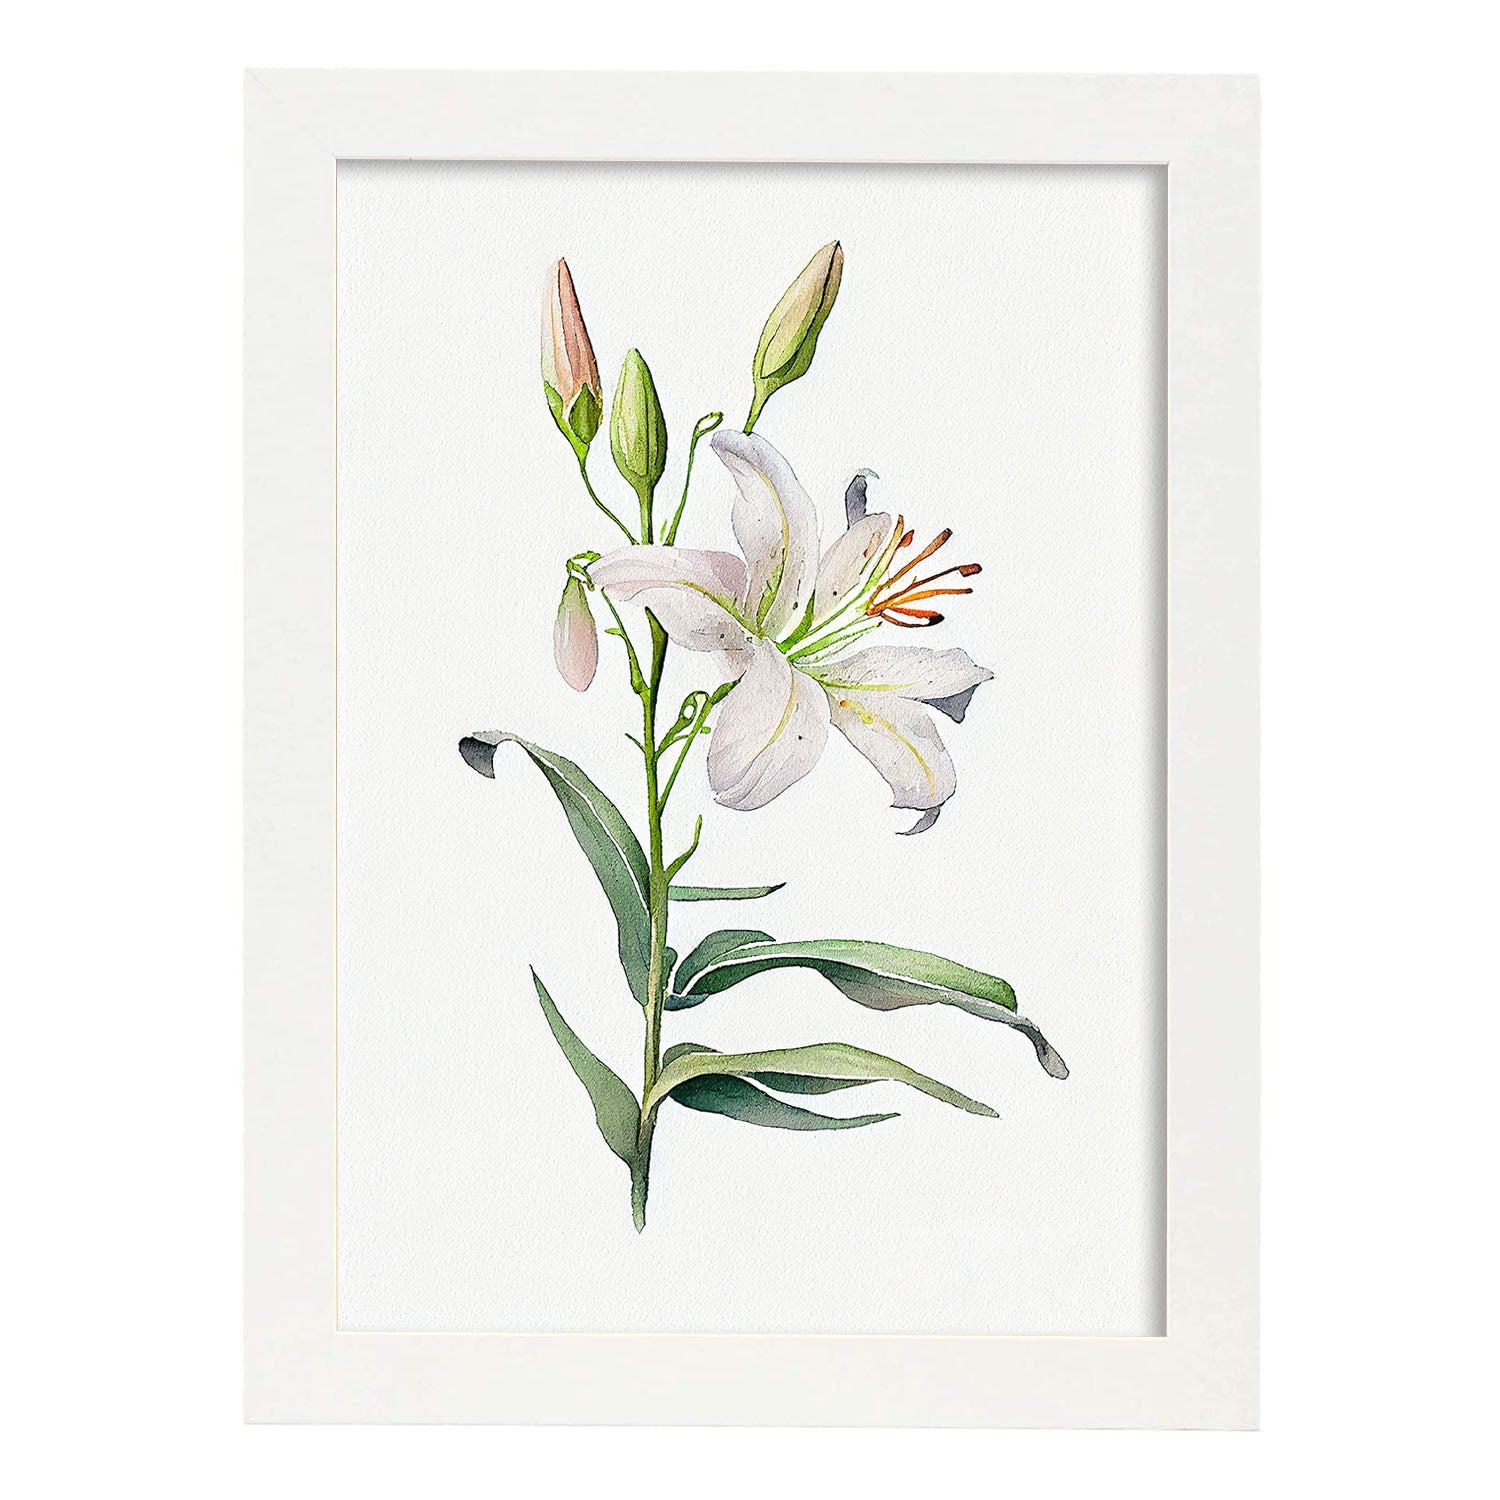 Nacnic watercolor minmal Lily. Aesthetic Wall Art Prints for Bedroom or Living Room Design.-Artwork-Nacnic-A4-Marco Blanco-Nacnic Estudio SL